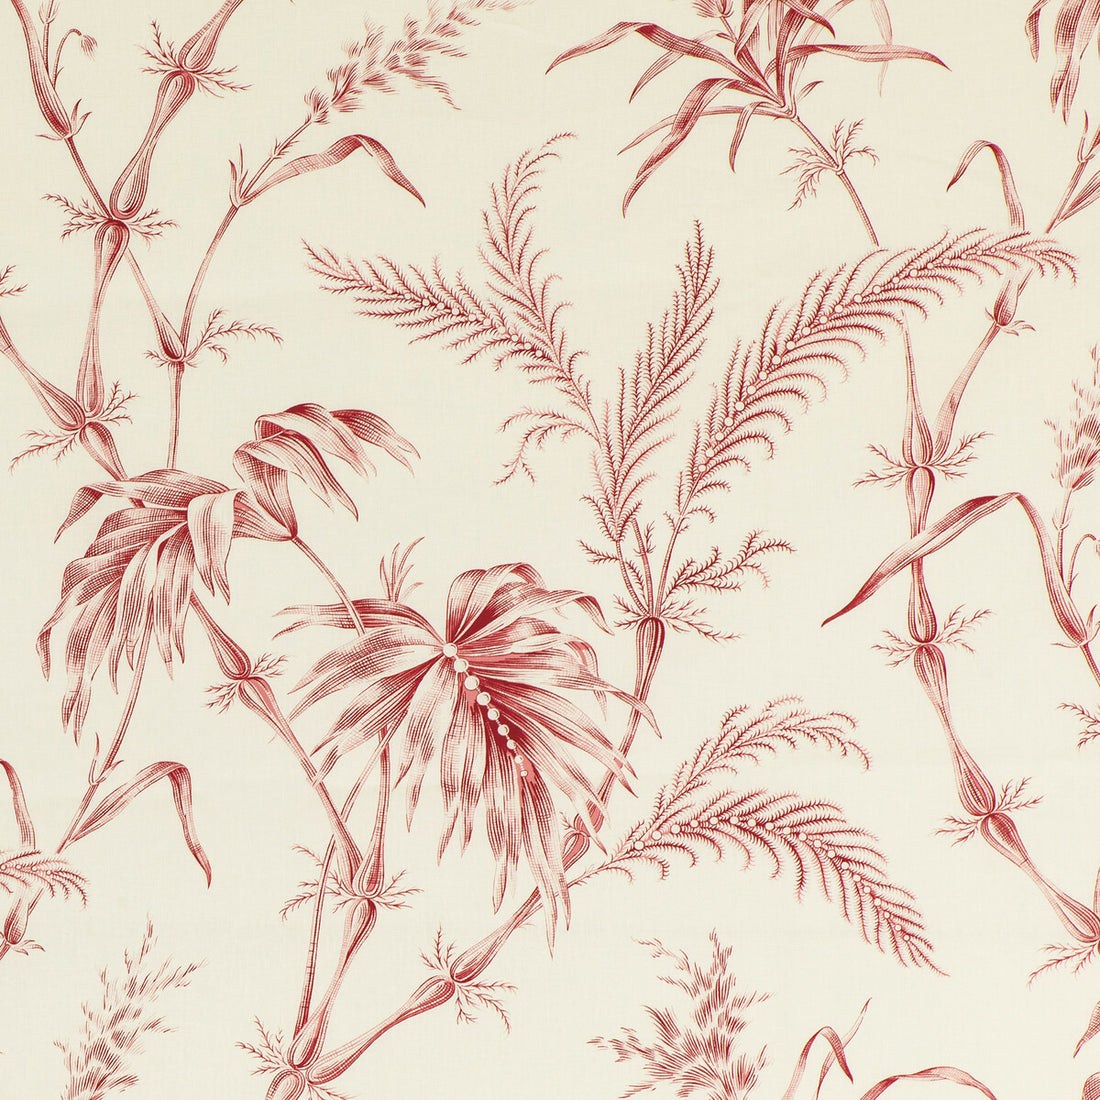 Lauziere Print fabric in red color - pattern 8020124.19.0 - by Brunschwig &amp; Fils in the Louverne collection